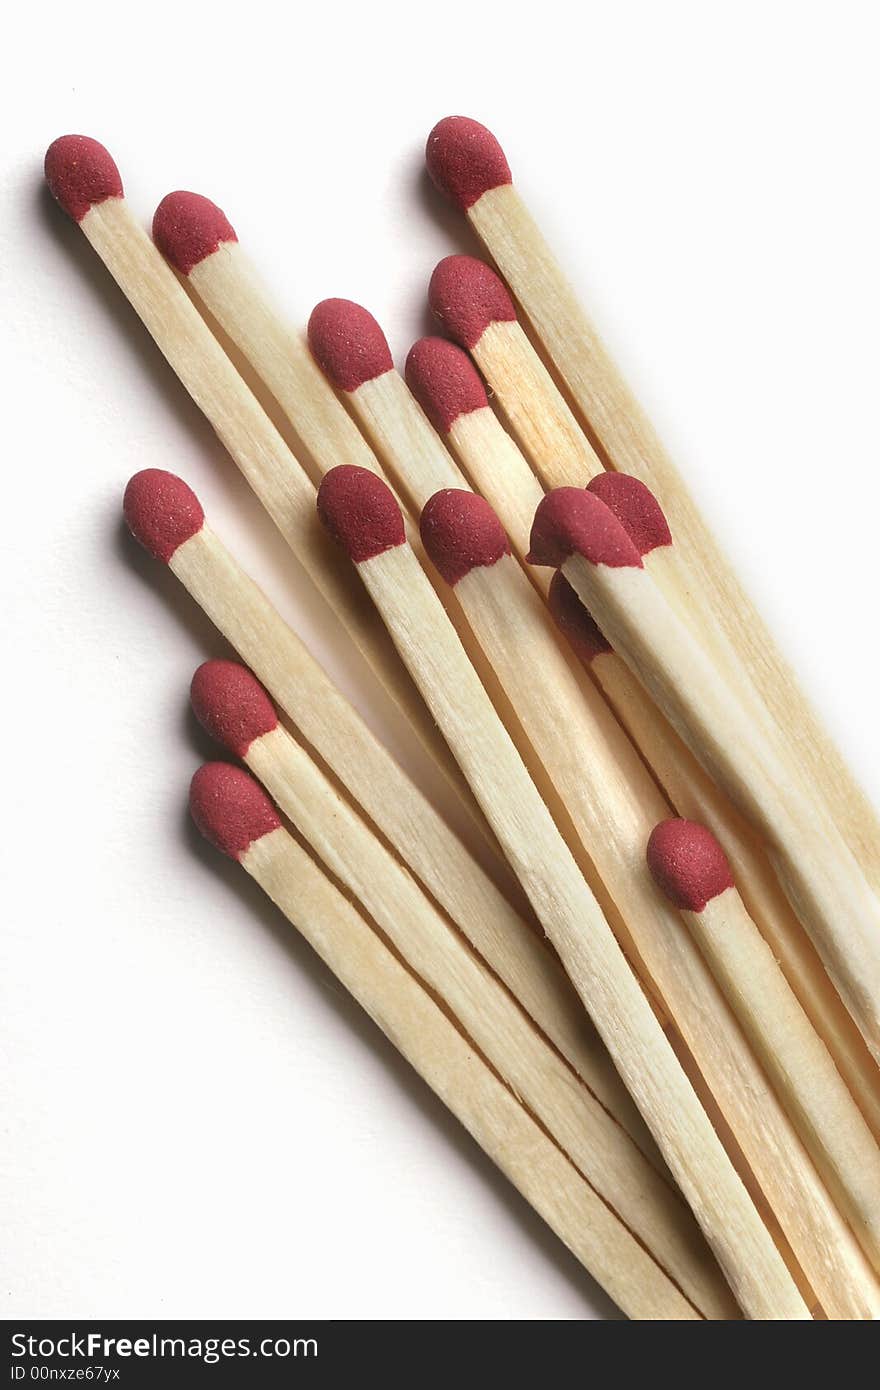 Wooden Matchsticks with red sulfur tips isolated on white background